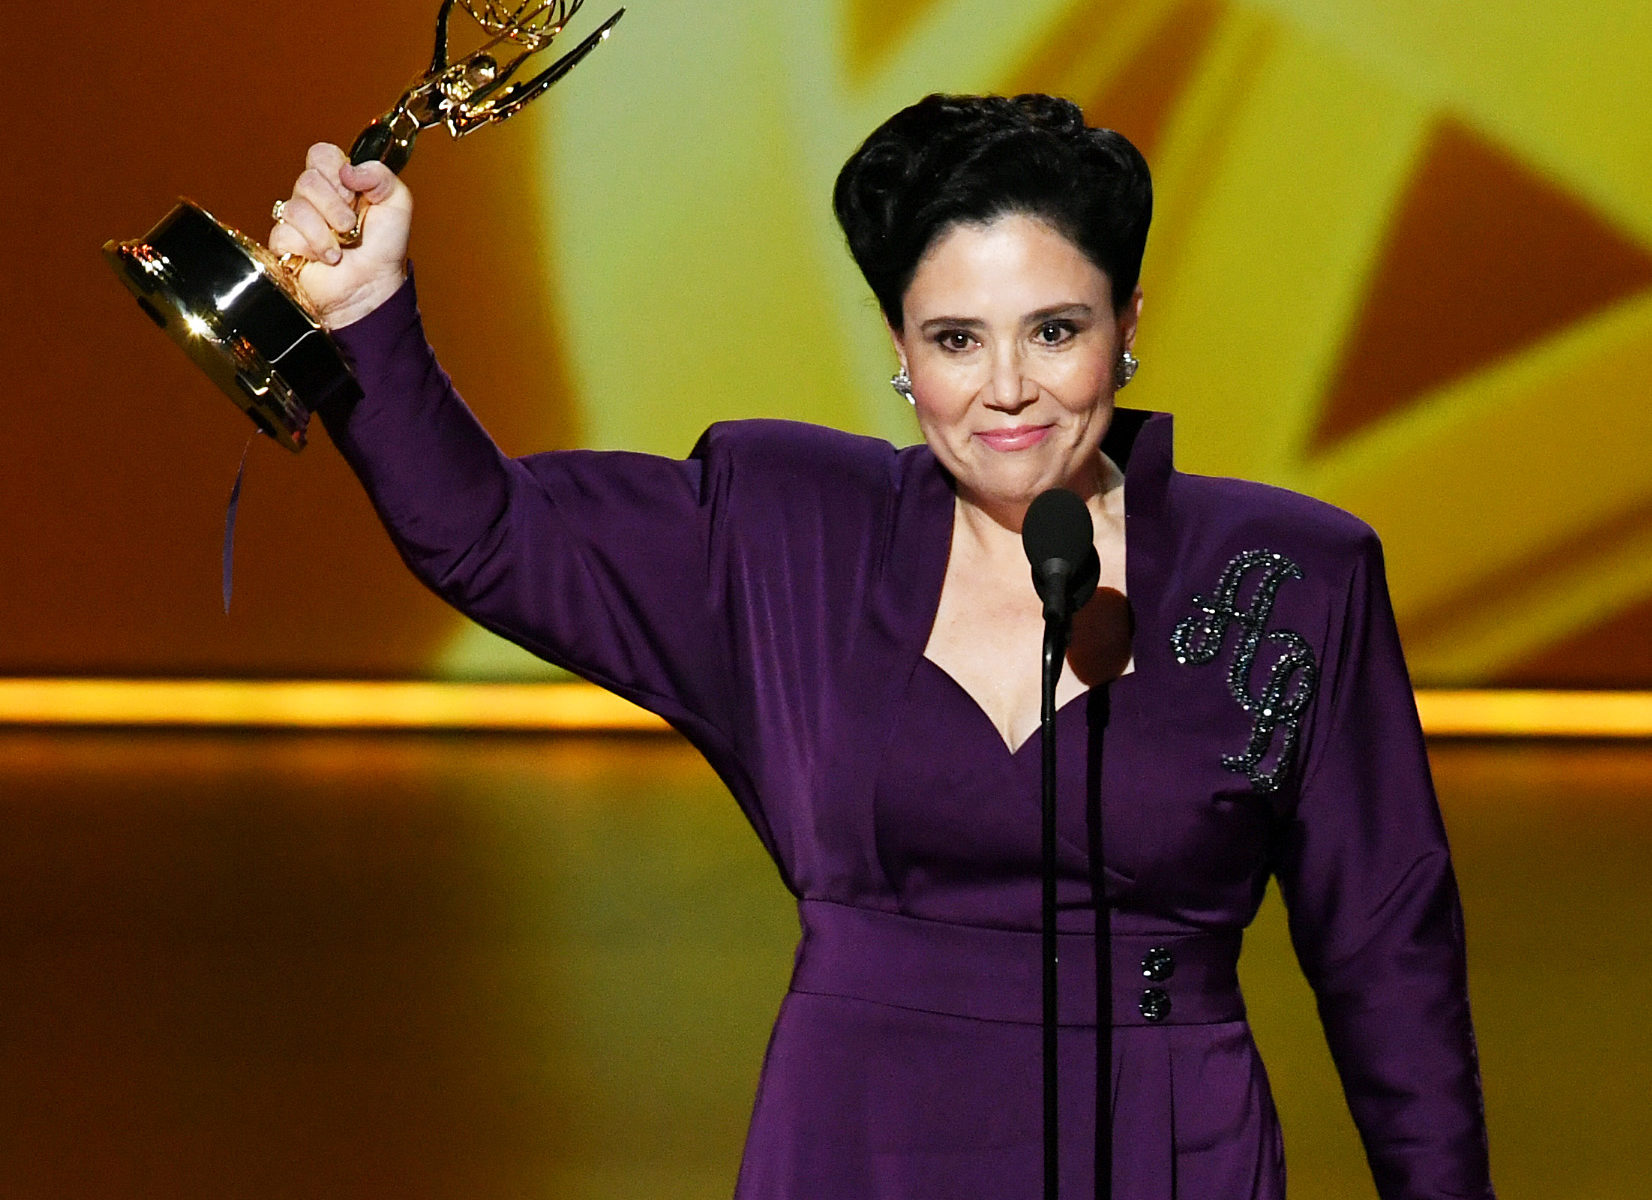 Alex Borstein accepts the Outstanding Supporting Actress in a Comedy Series award for 'The Marvelous Mrs. Maisel' onstage during the 71st Emmy Awards on September 22, 2019 in Los Angeles, California. (Photo by Kevin Winter/Getty Images)